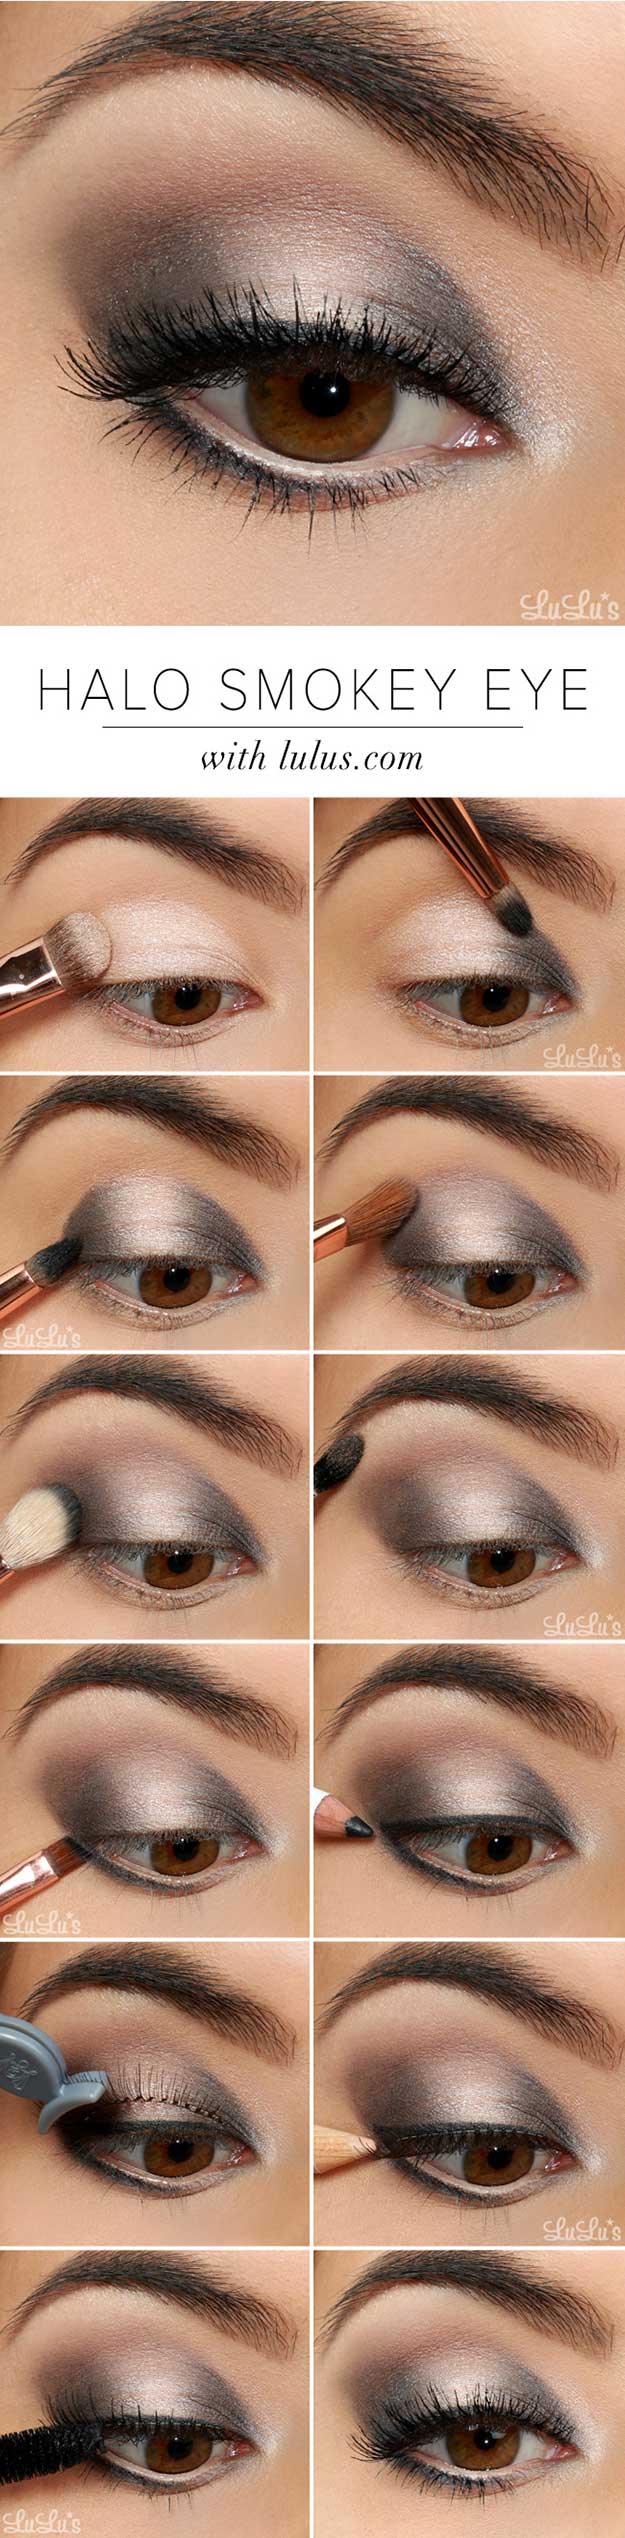 New Years Eve Eye Makeup 34 Makeup Ideas For New Years Eve The Goddess